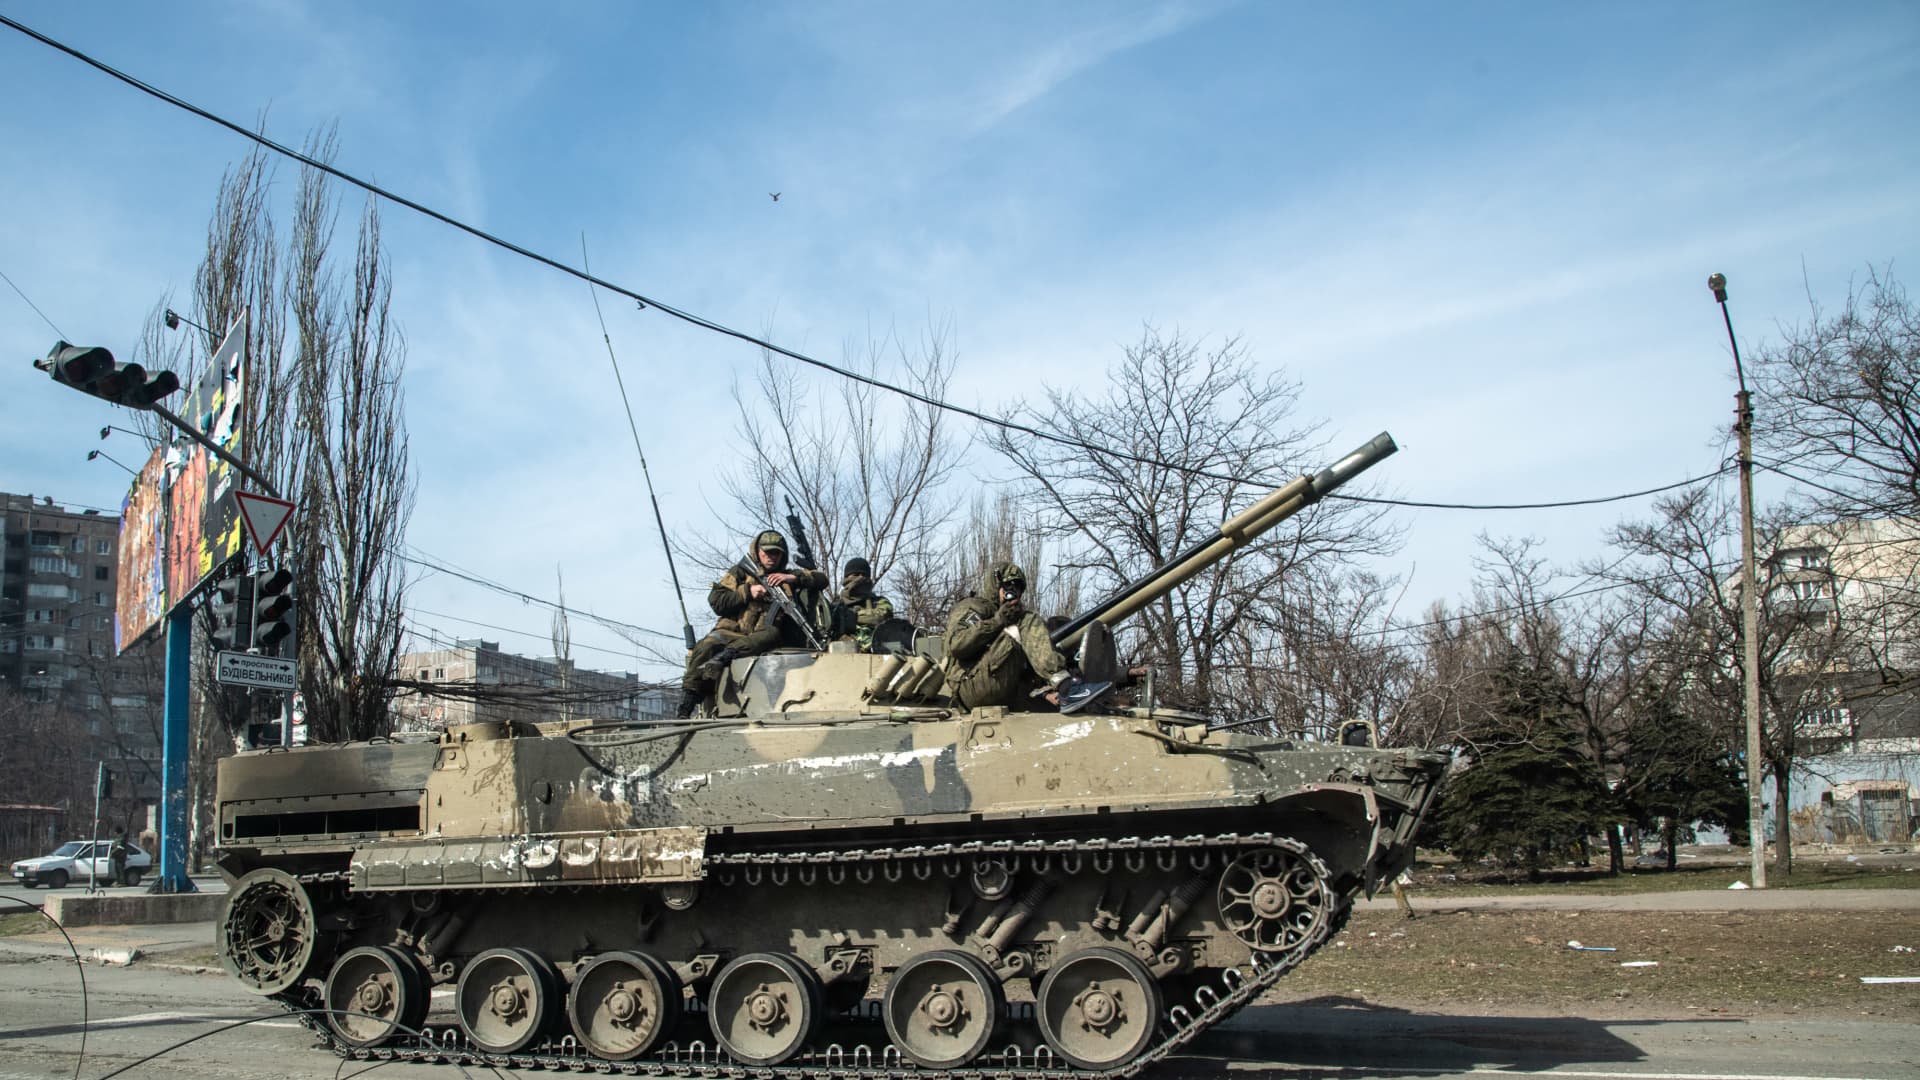 Russian troops atop a fighting vehicle ride through the streets of Mariupol on March 29.